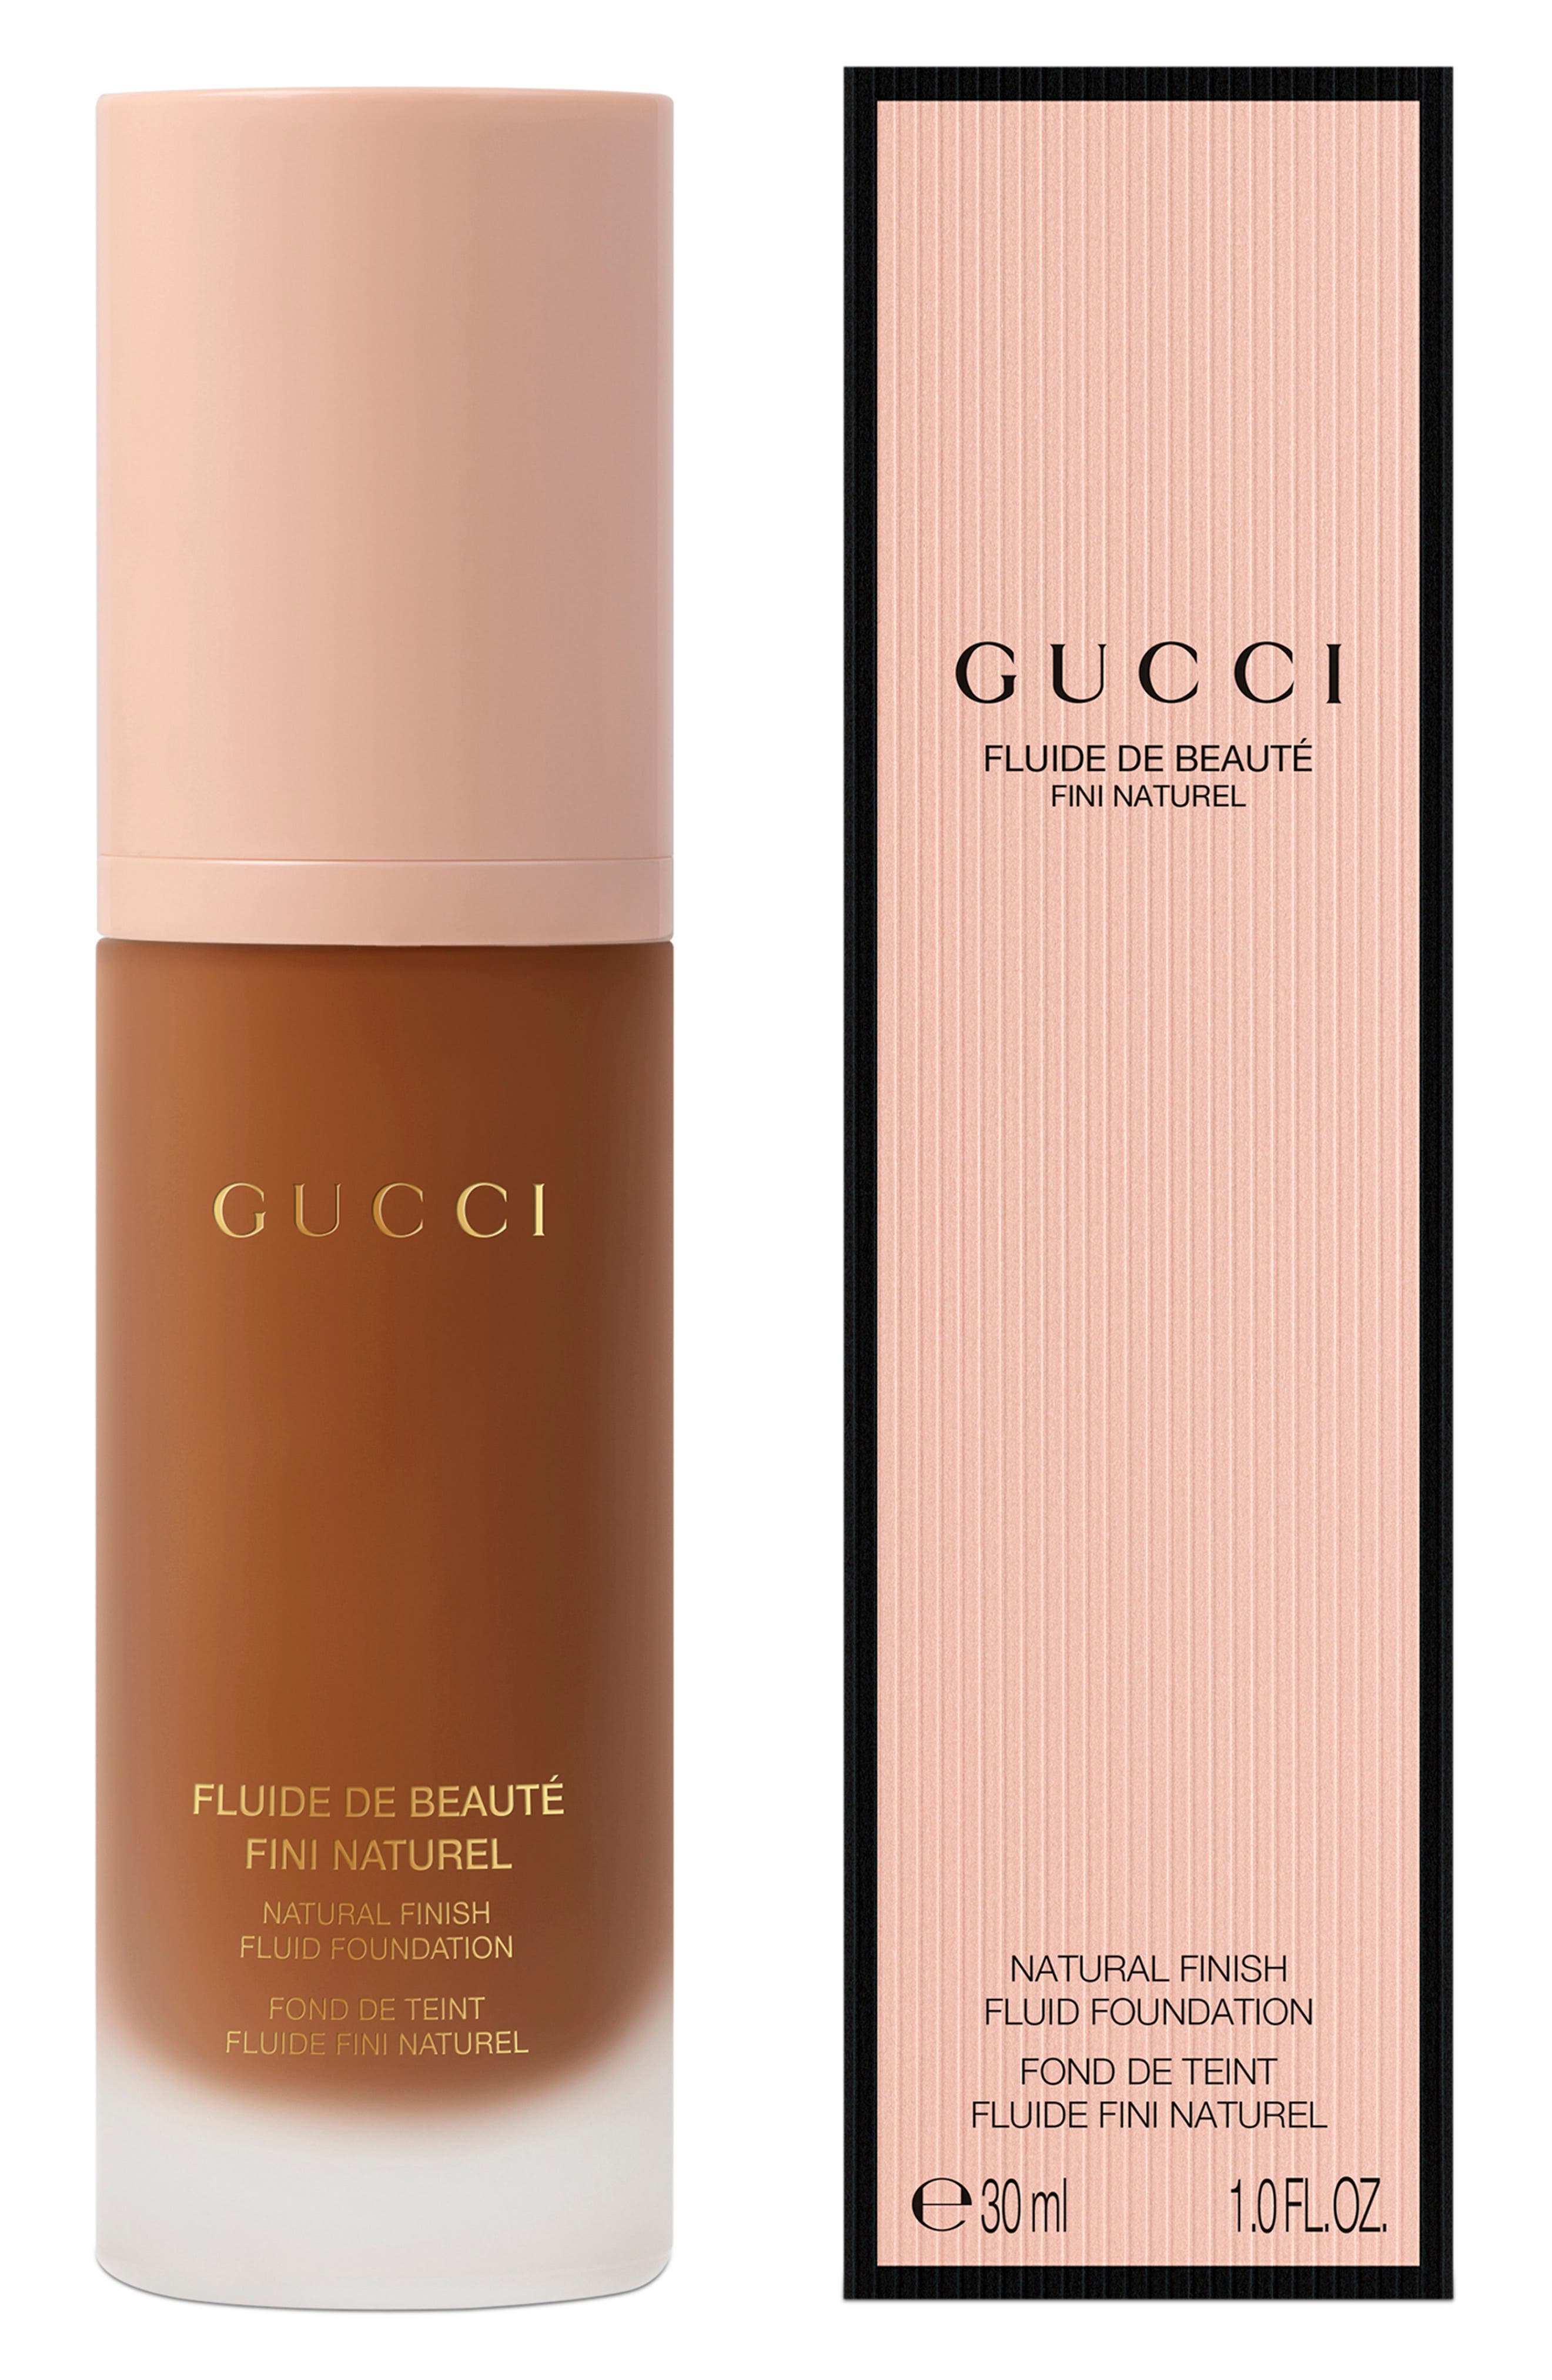 Gucci Natural Finish Fluid Foundation in 420N at Nordstrom